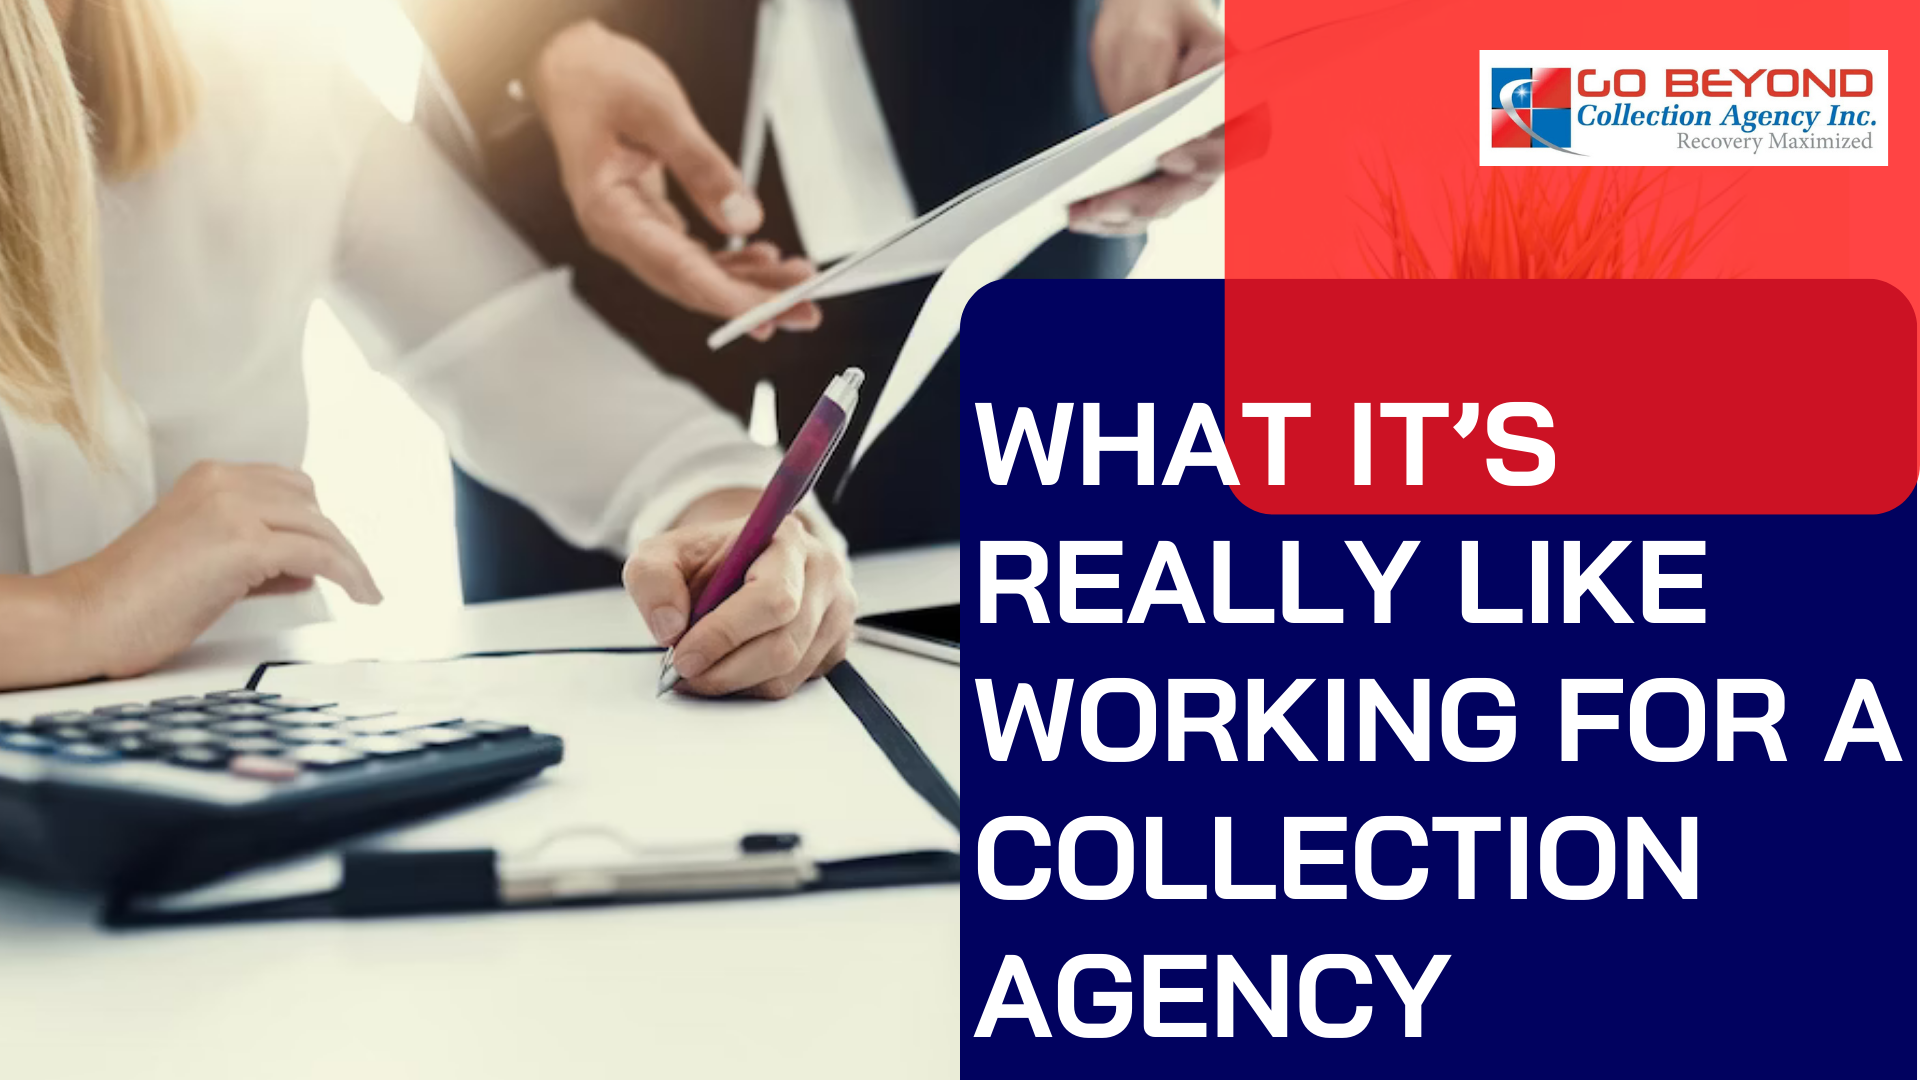 Professional Collection Agencies